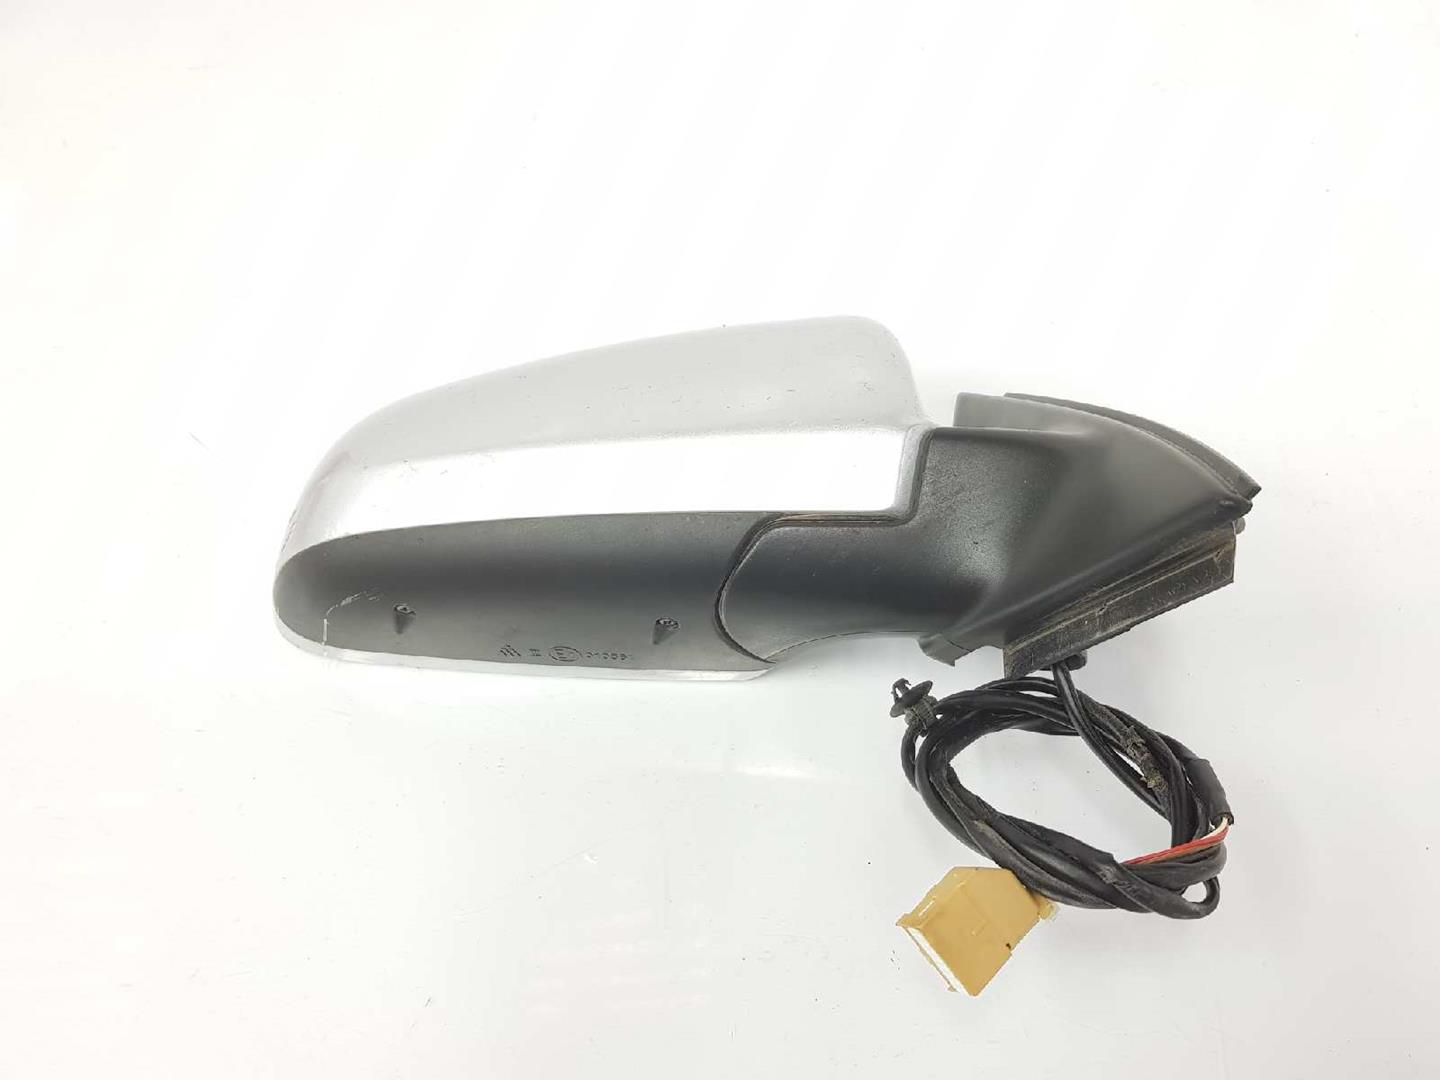 AUDI A4 B6/8E (2000-2005) Right Side Wing Mirror 8E1858531AA, NVE2311, GRIS5B/Y7W 19723436